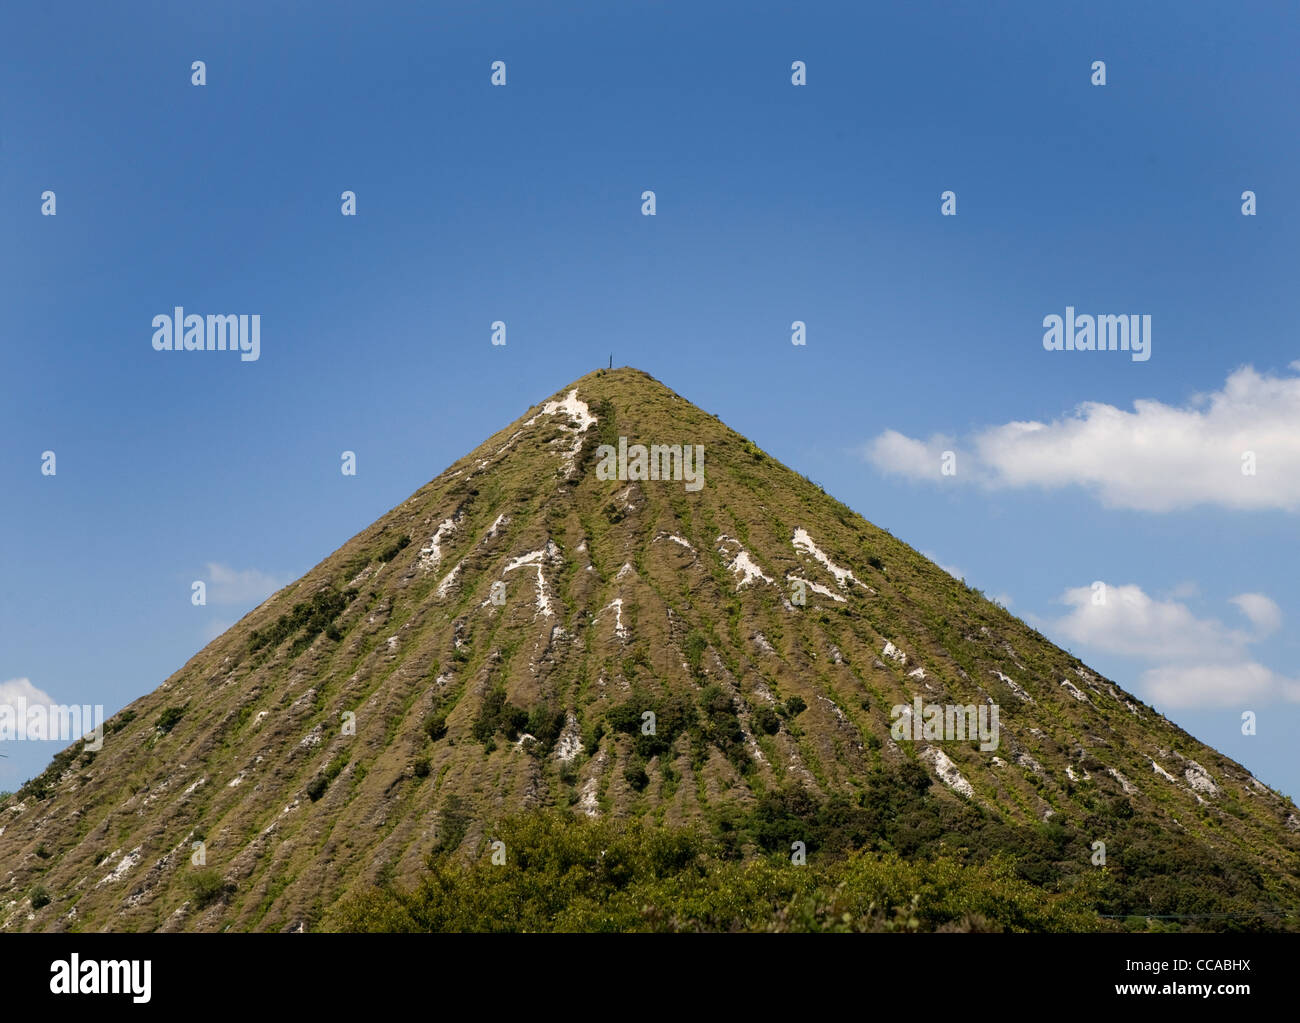 The distinctive conical shape of a China Clay spoil heap near St Austell, Cornwall. Stock Photo